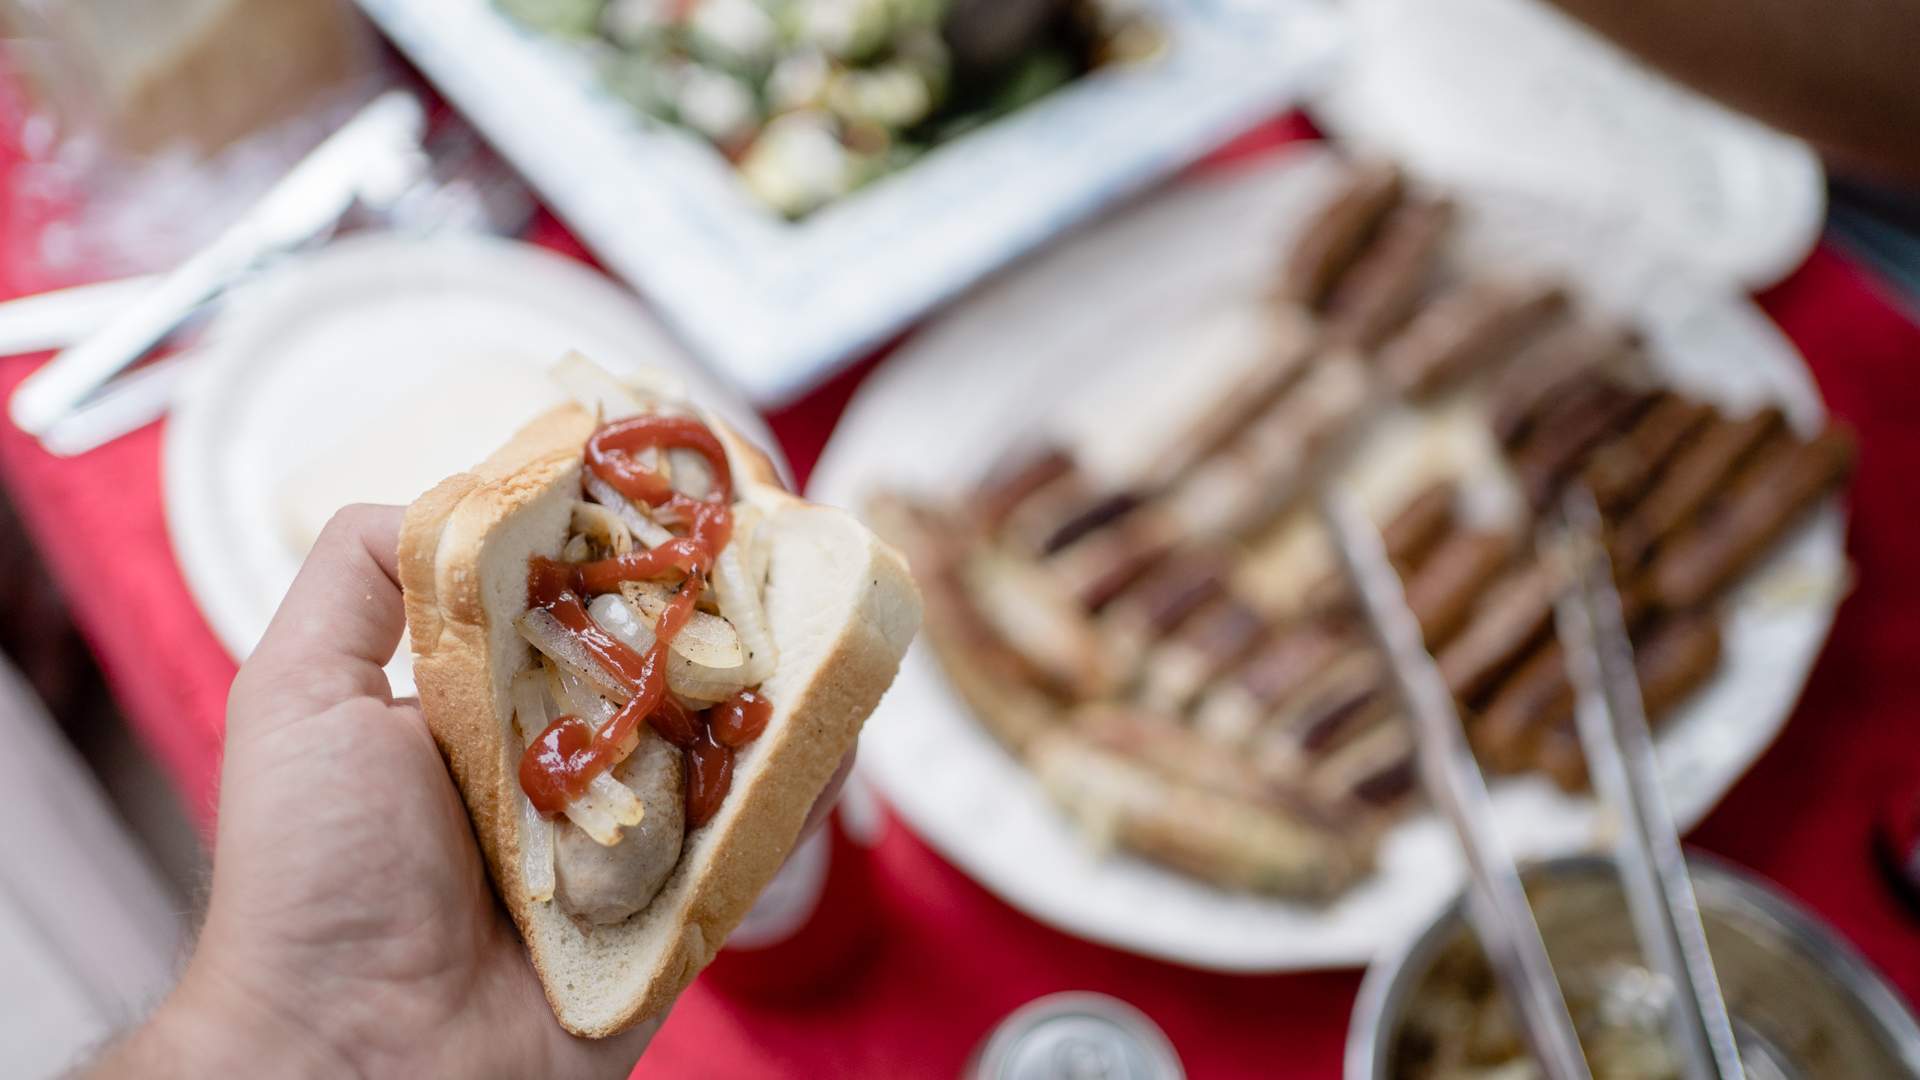 We've Figured Out Your Perfect Sausage Based on Your Hottest 100 Pick — and It's All for a Good Cause